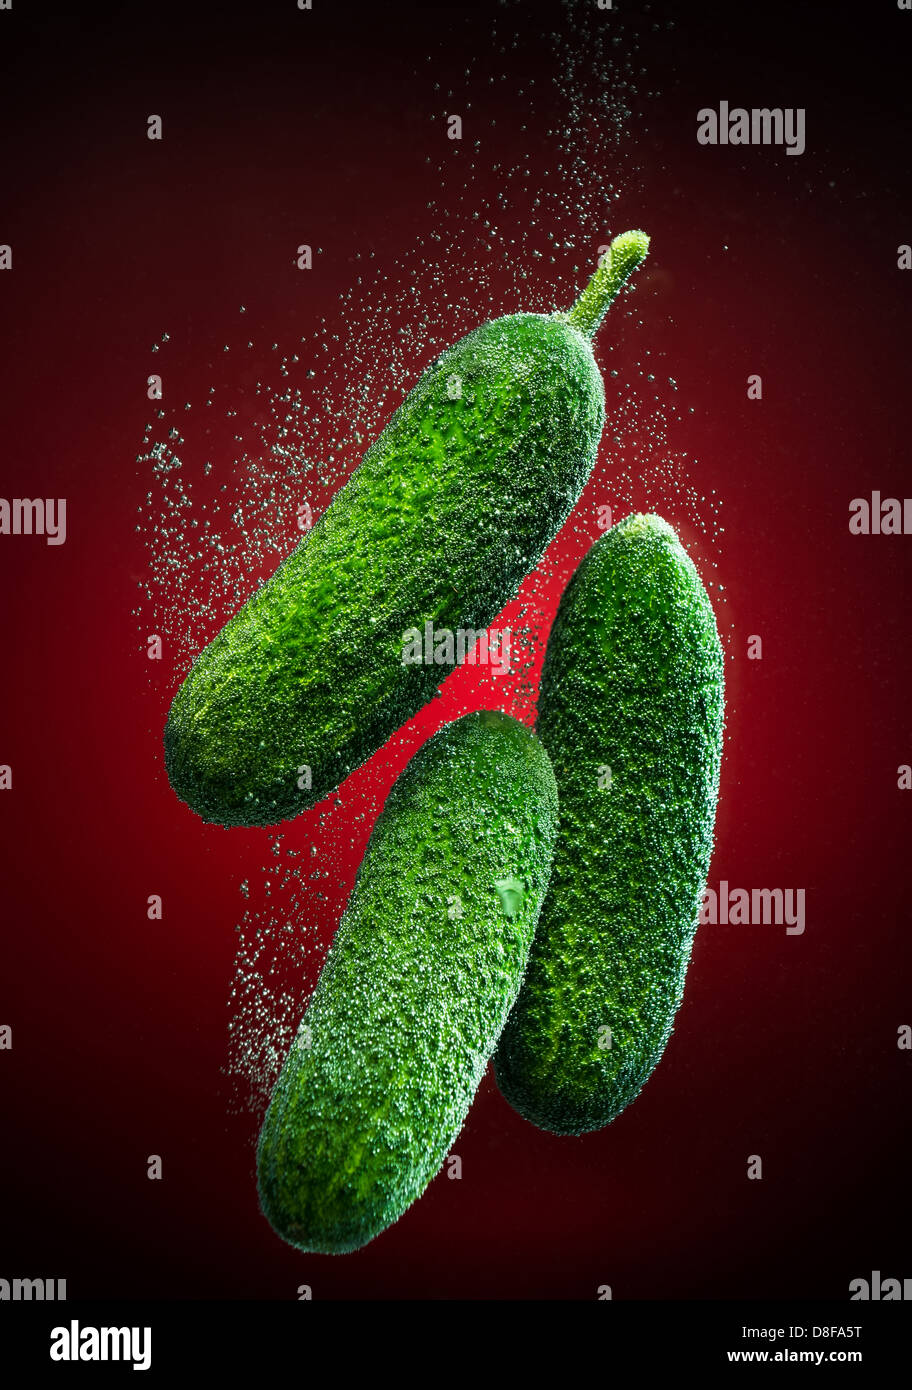 Beautiful cucumber close-up photo with carbon dioxide bubbles Stock Photo